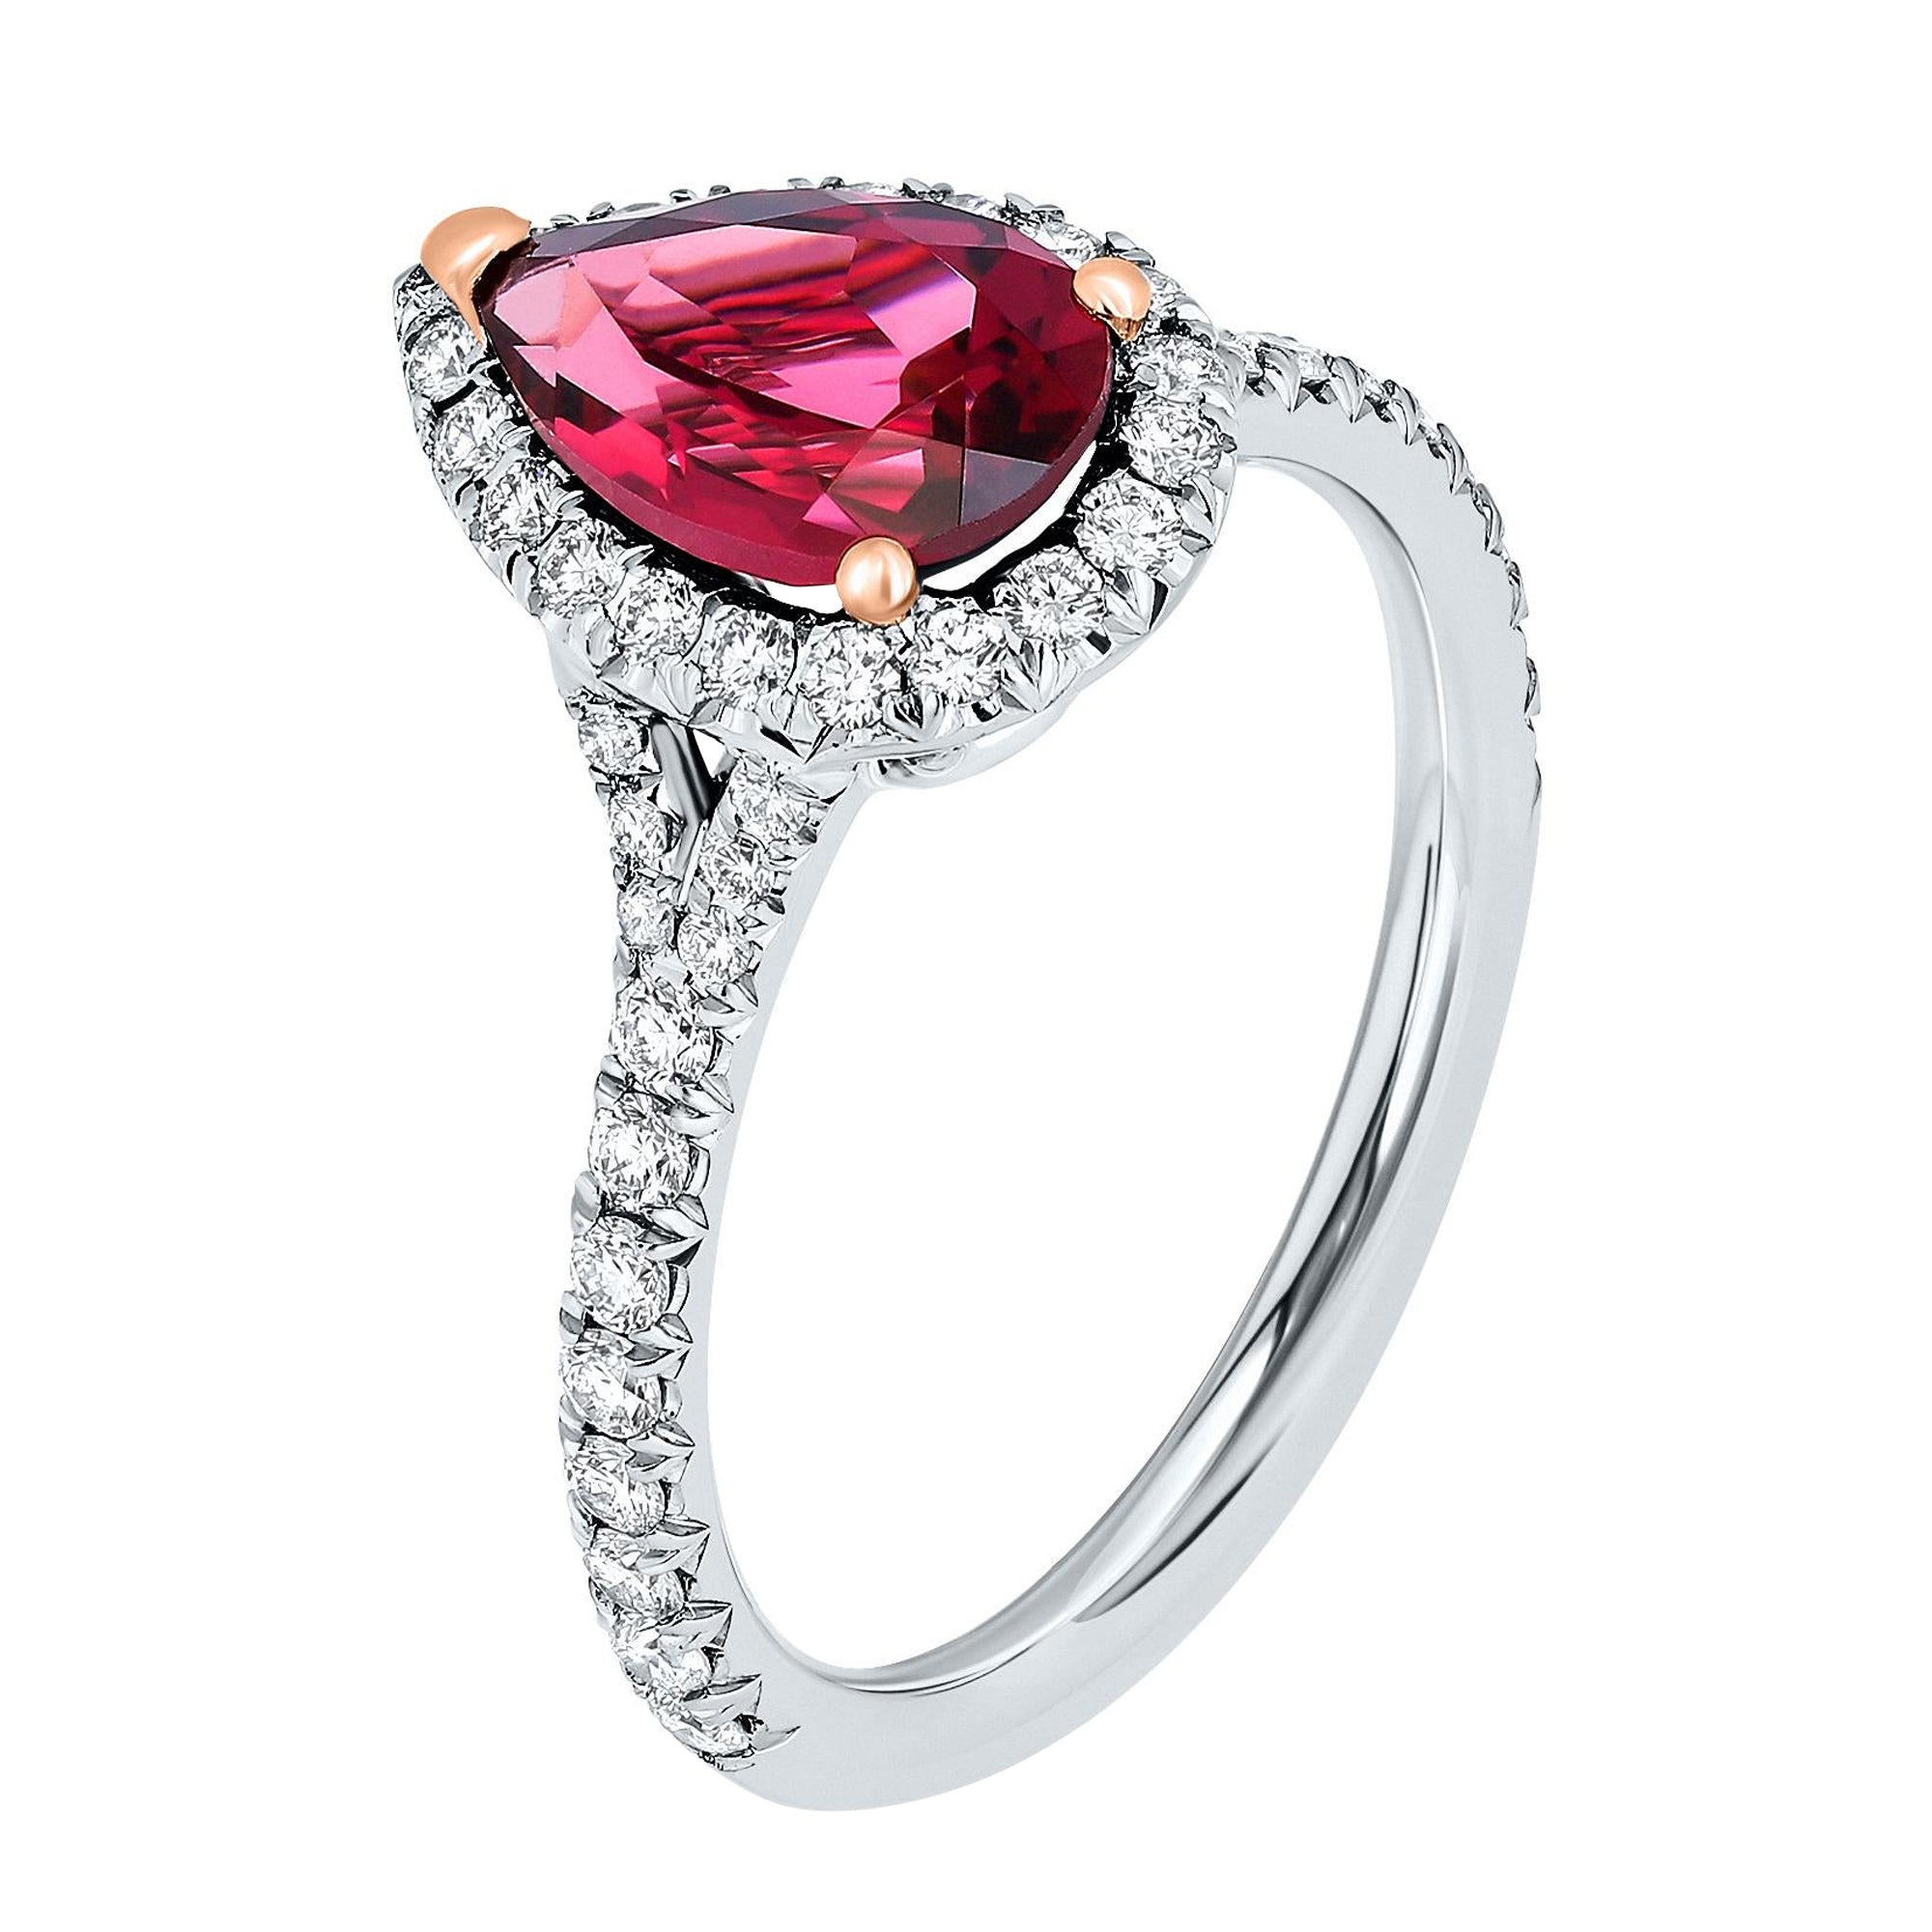 2.33 Carat Red Pear Tourmaline & Diamond Halo Cocktail Ring, set in Platinum. For Sale